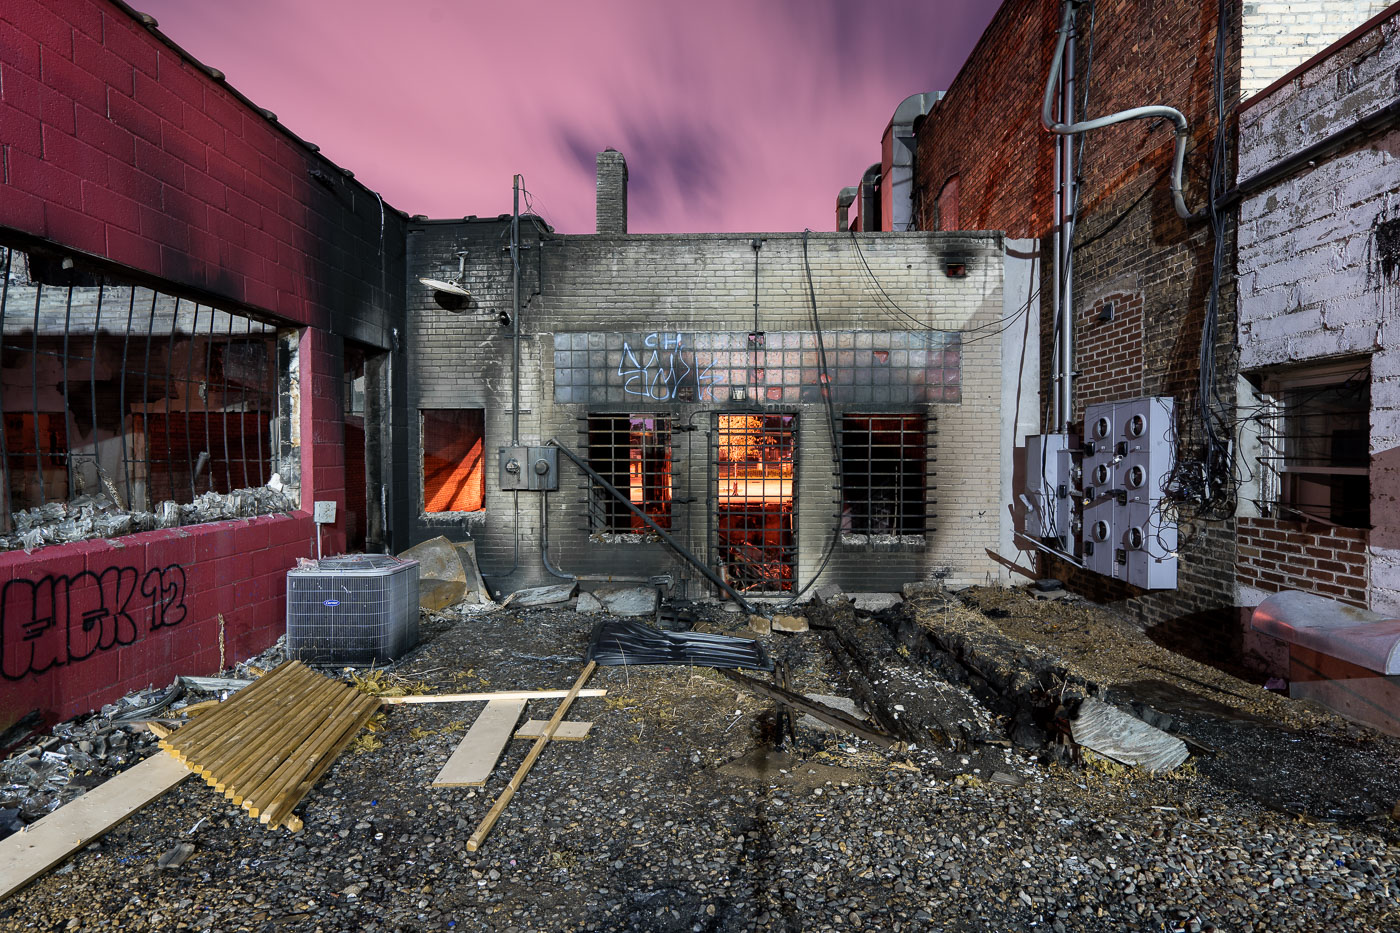 Night photo of burned out building during riots